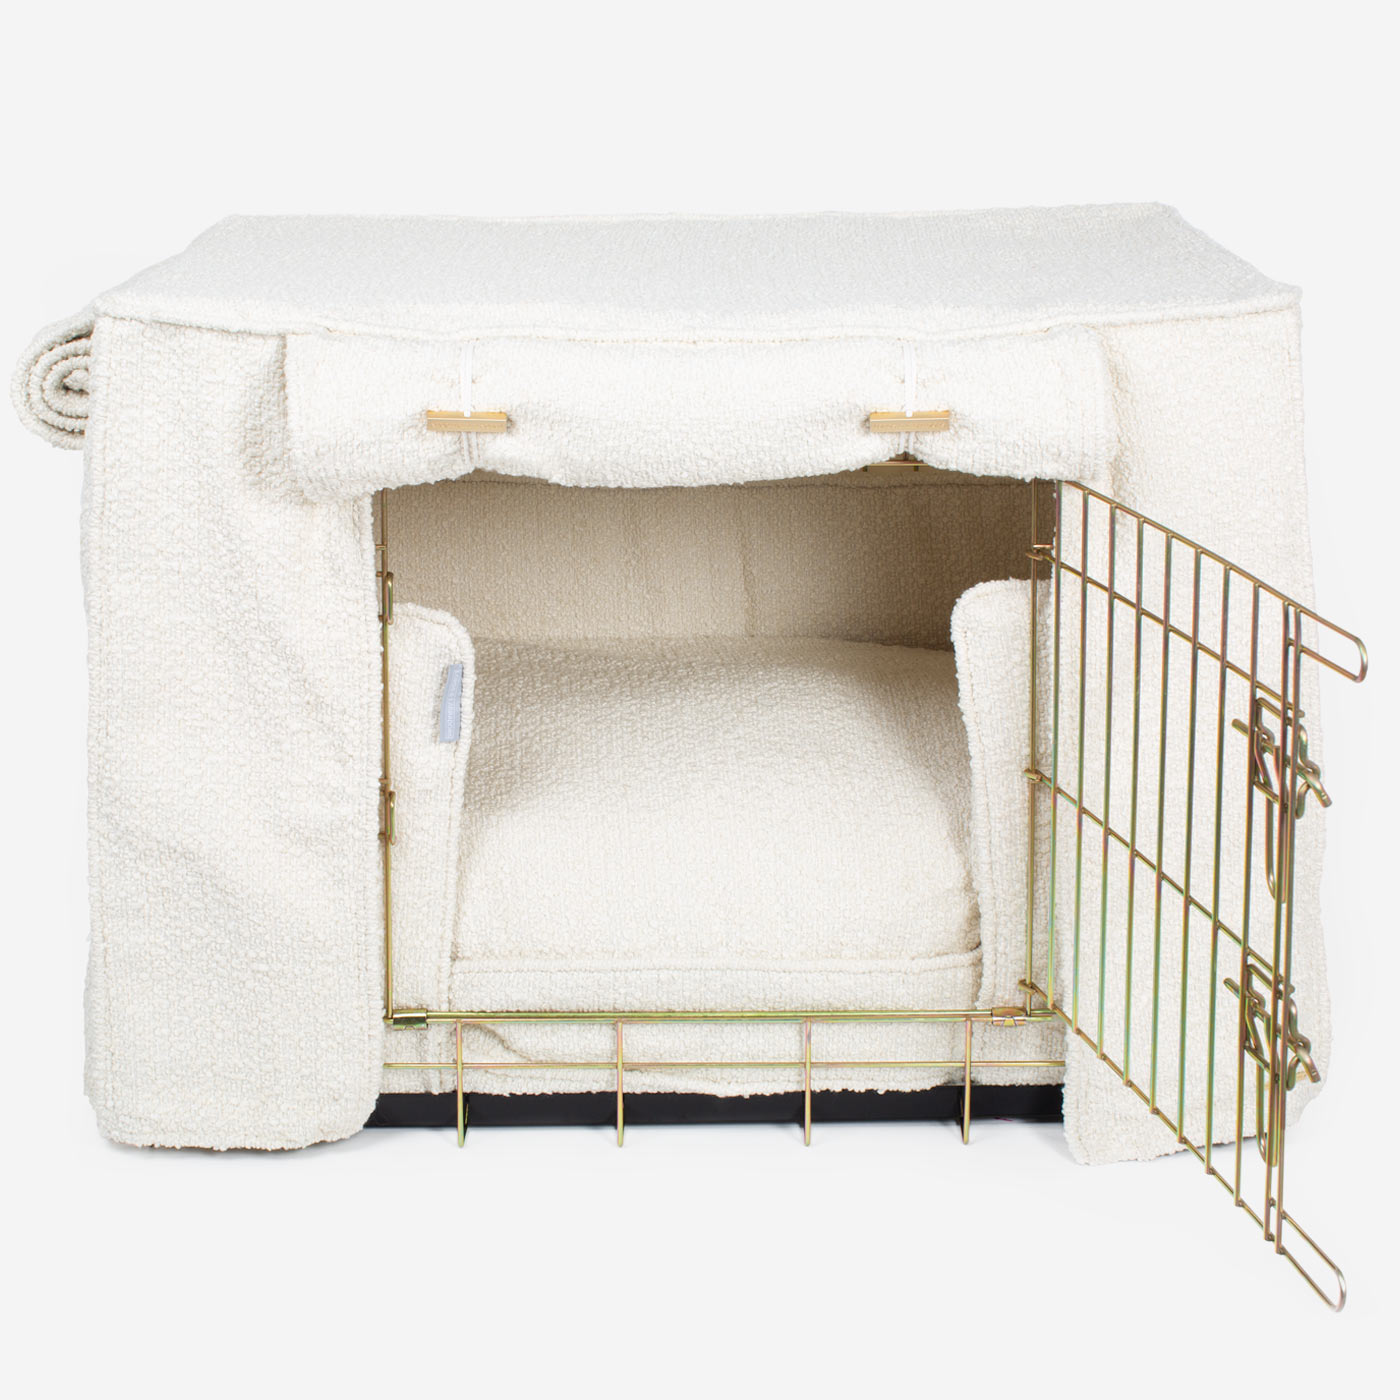  Luxury Heavy Duty Dog Cage, In Stunning Ivory Bouclé Cage Set, The Perfect Dog Cage Set For Building The Ultimate Pet Den! Dog Cage Cover Available To Personalize at Lords & Labradors US